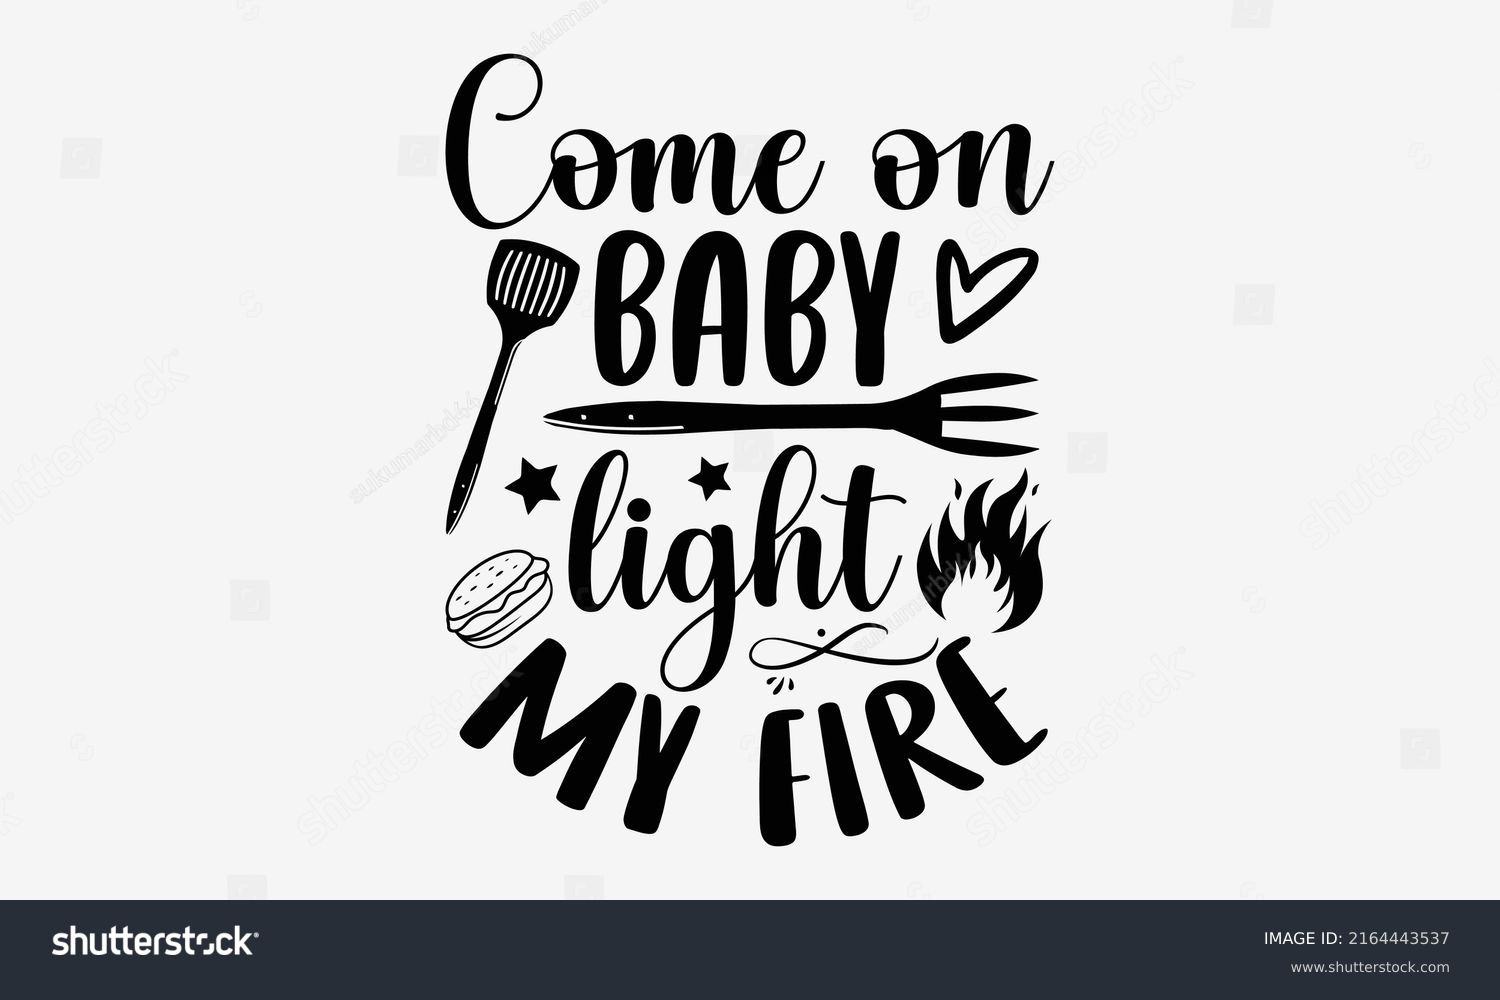 SVG of Come on baby light my fire - Barbecue t shirt design, SVG Files for Cutting, Handmade calligraphy vector illustration, Hand written vector sign, EPS svg